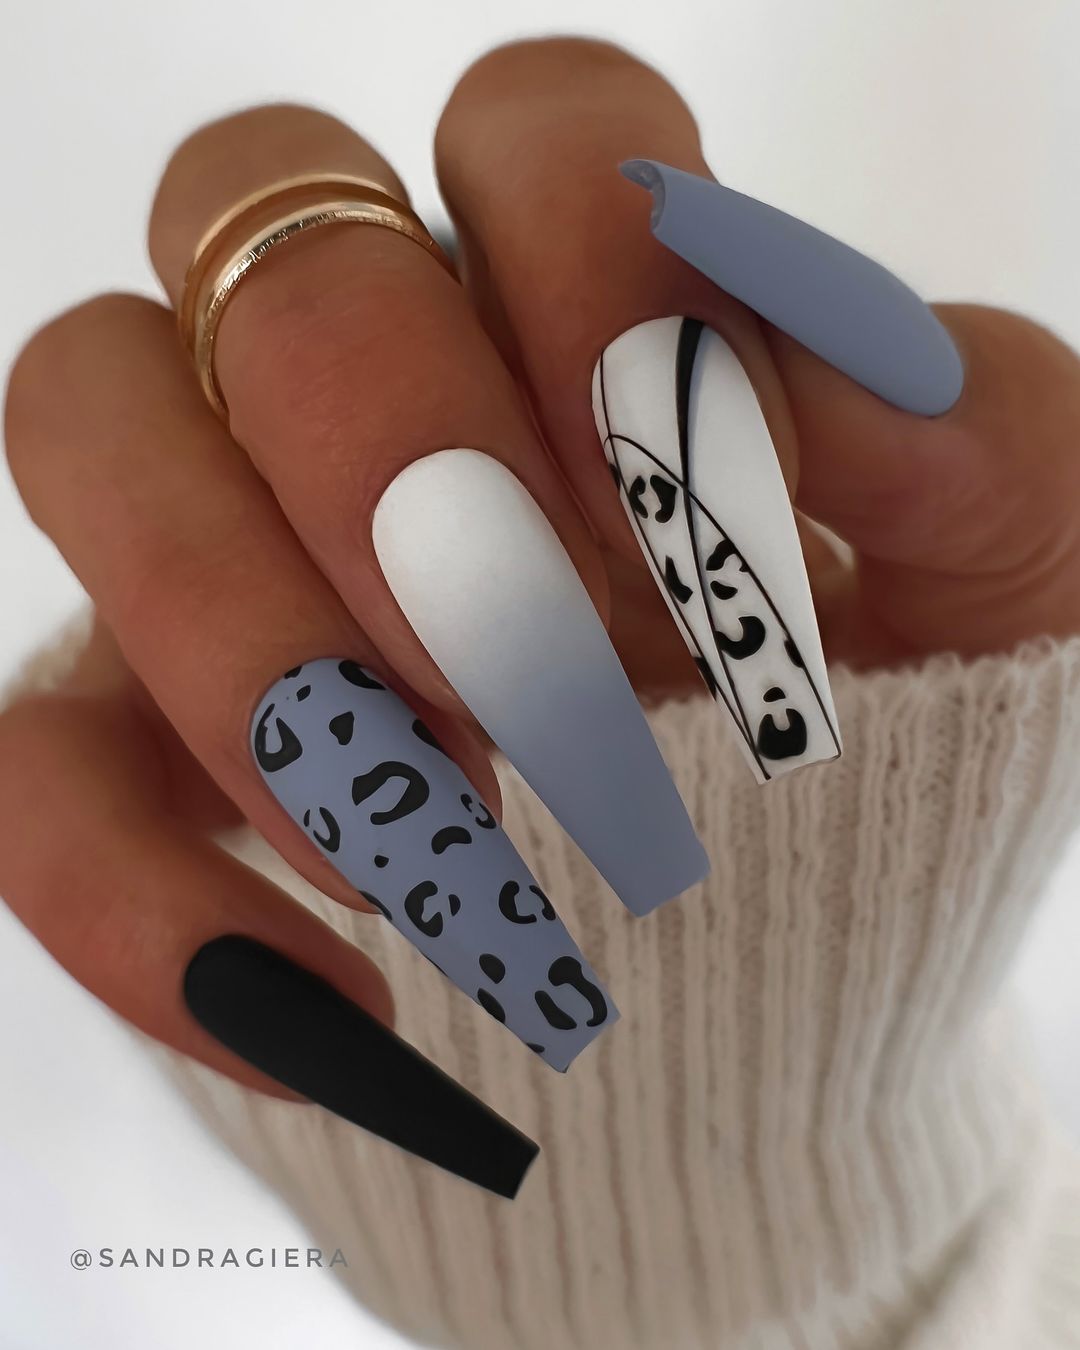 Fall Coffin Nails: 25 Stunning Designs to Try This Season